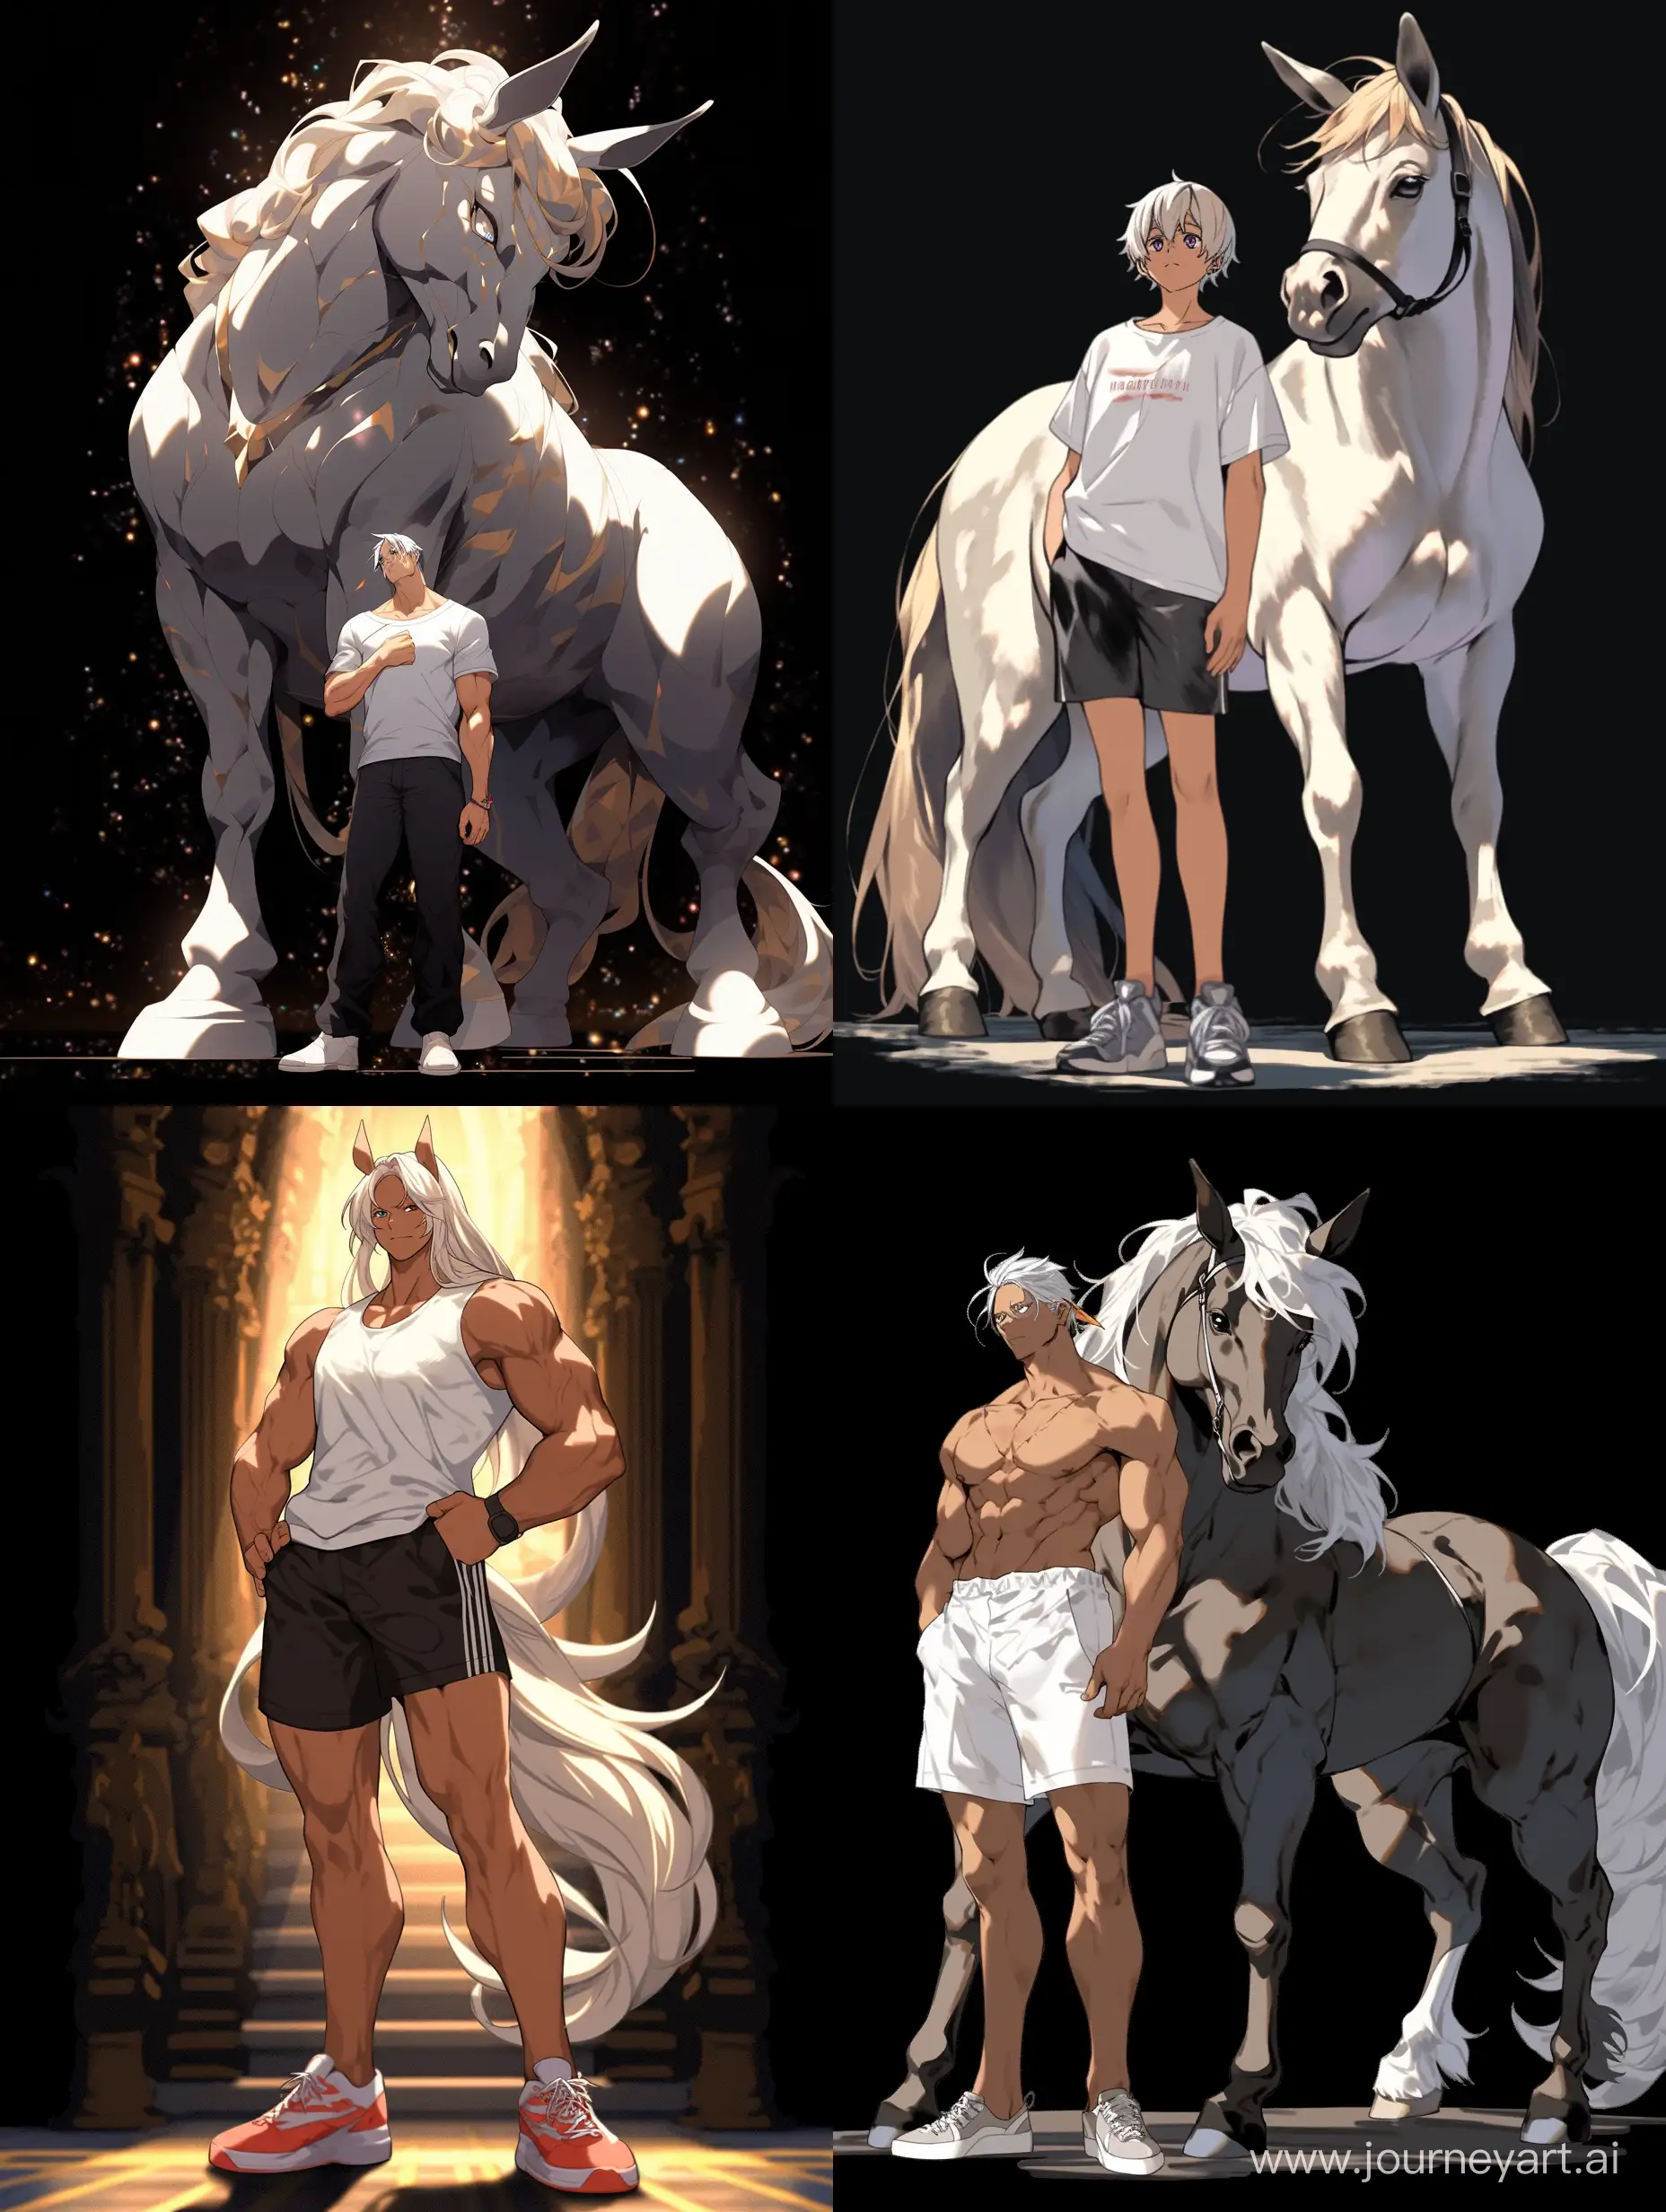 Adorable-Young-Centaur-with-Horse-Ears-in-Cinematic-Anime-Style